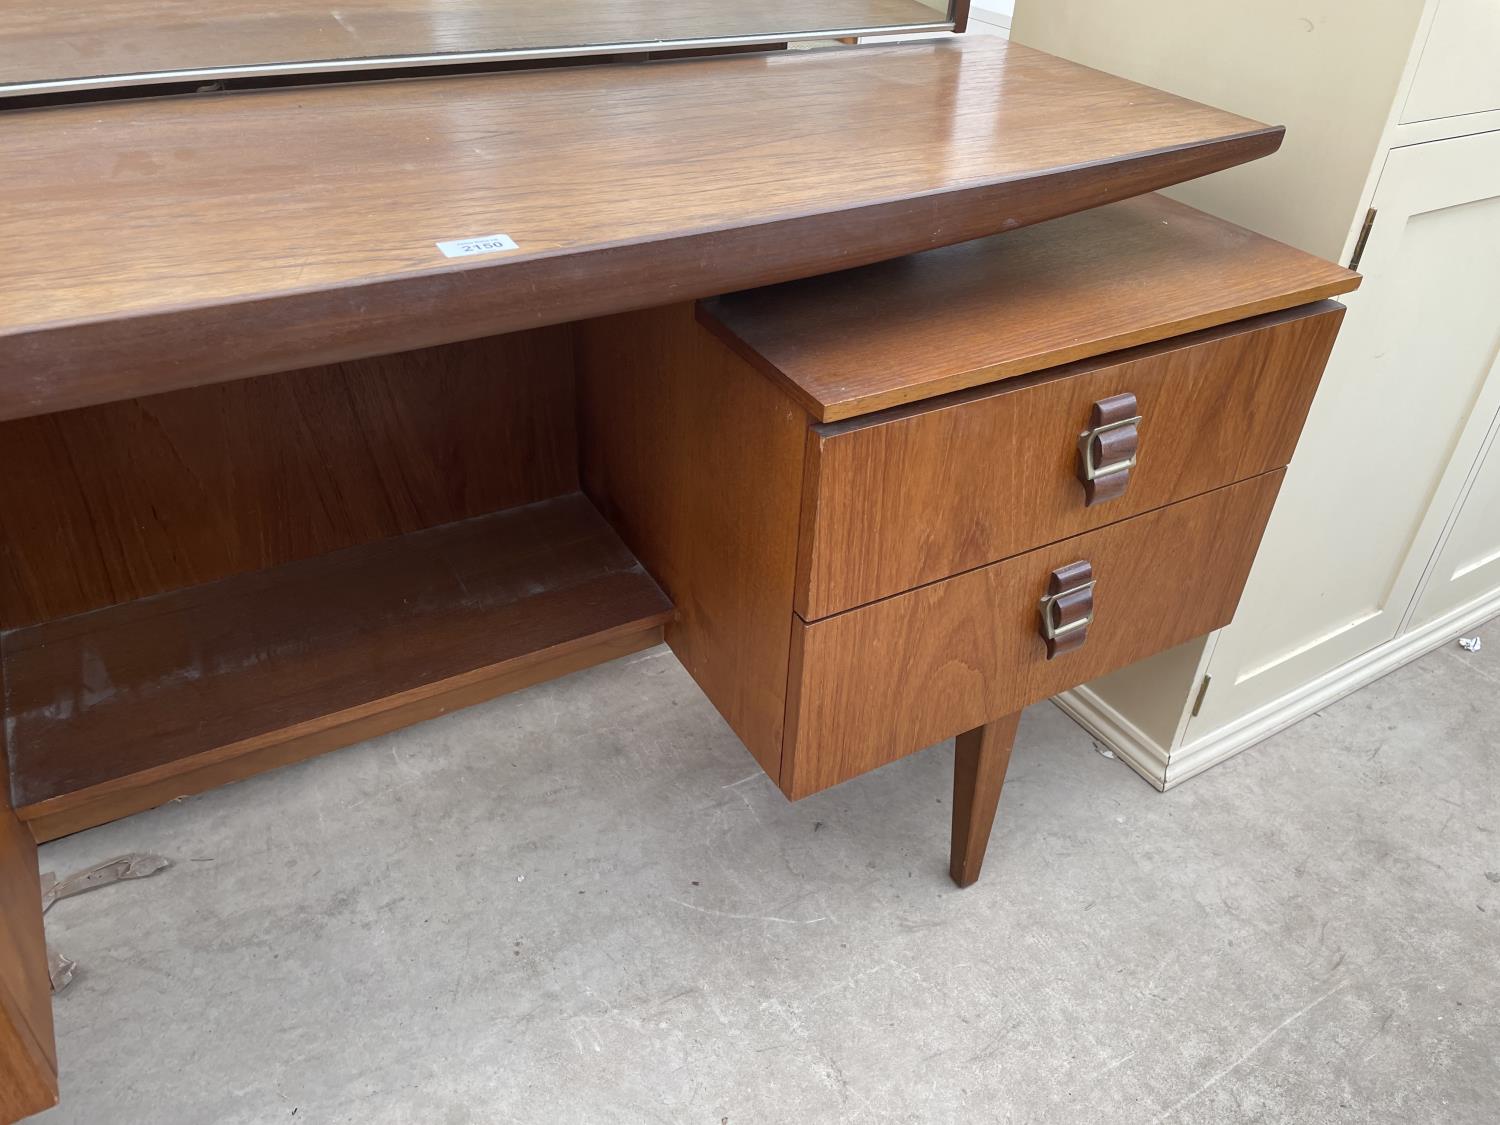 A RETRO TEAK DRESSING TABLE ENCLOSING FOUR DRAWERS WITH BELT BUCKLE STYLE HANDLES, 60" WIDE - Image 5 of 5